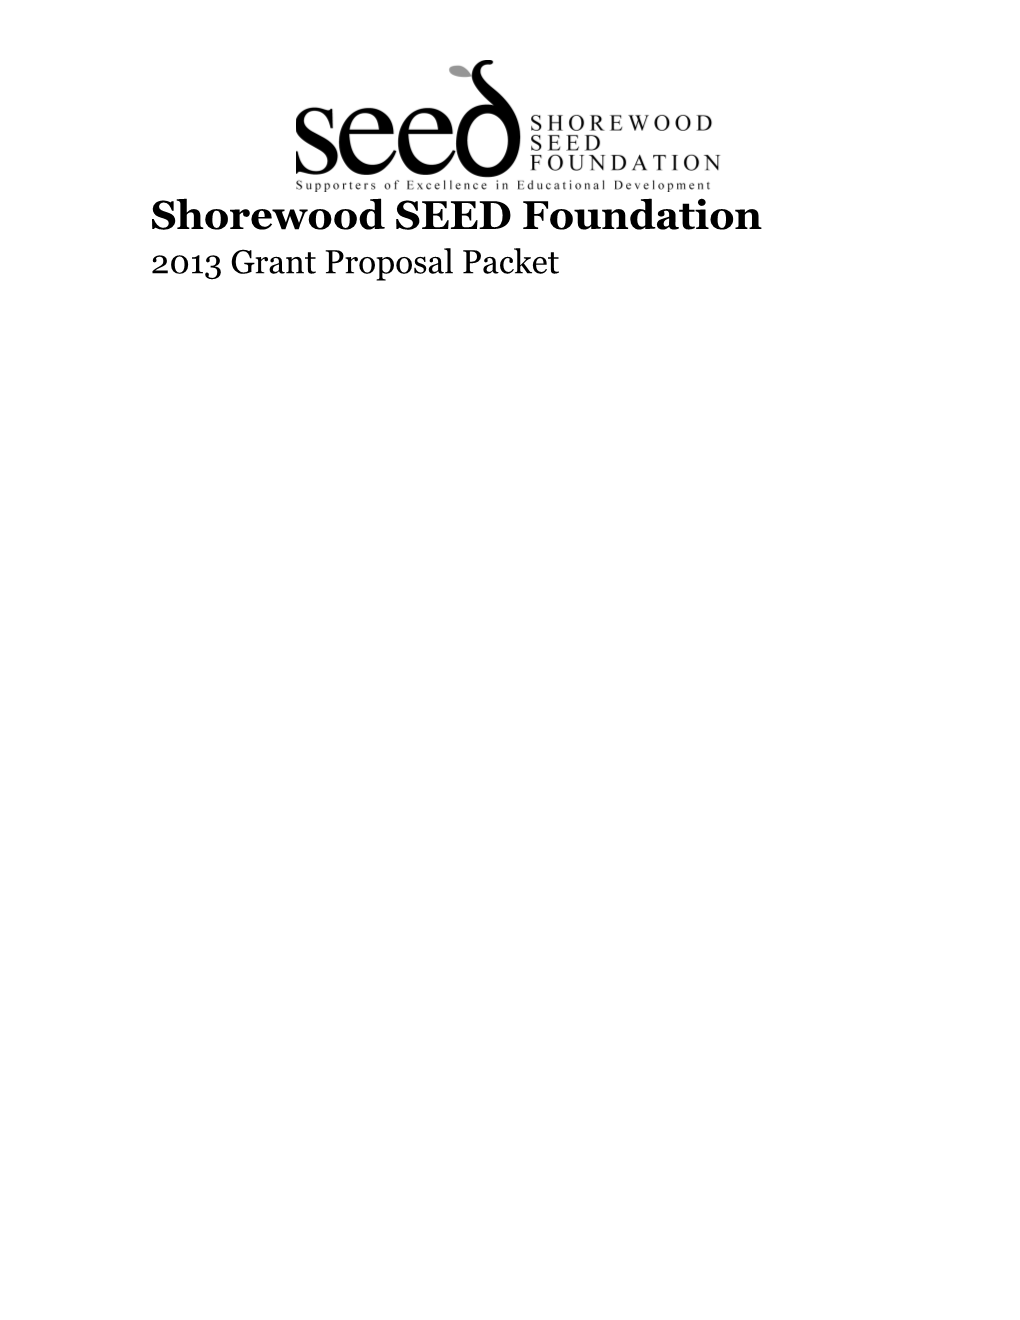 SEED Grant Proposal Packet